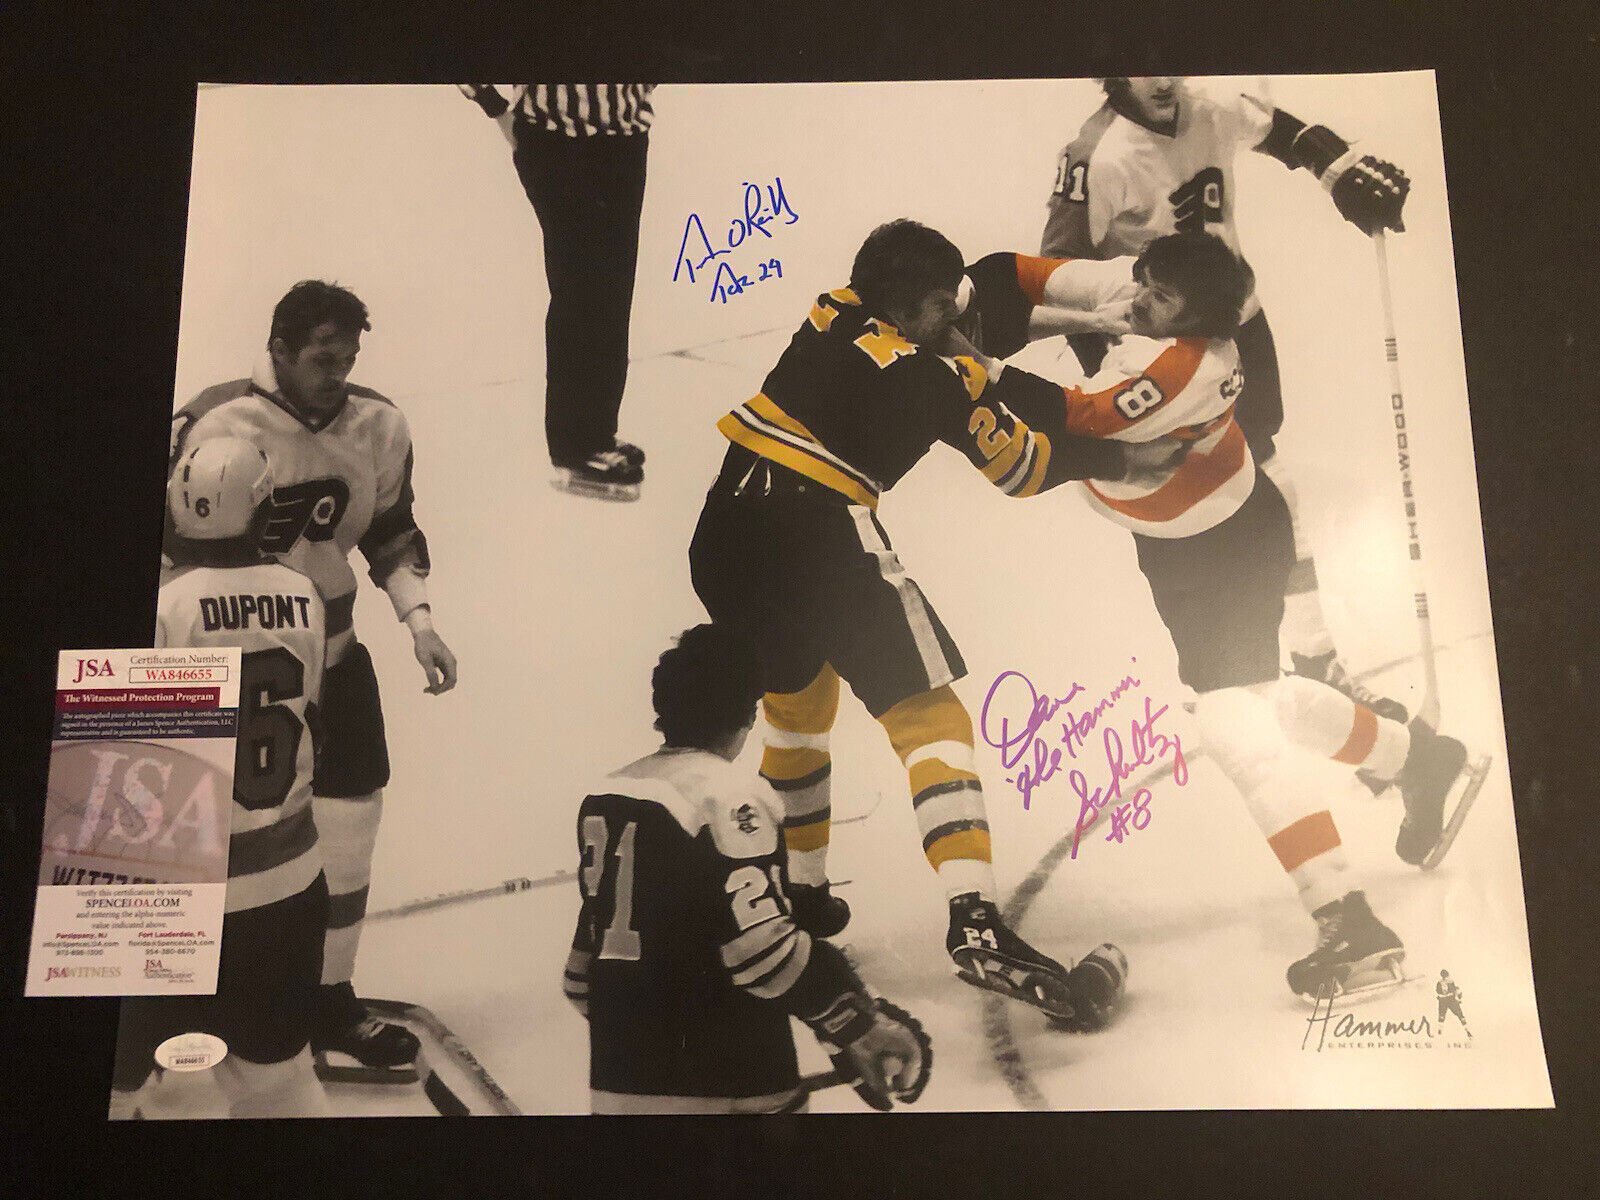 Dave Schultz & Terry O'Reilly Signed 8x10 Photo (JSA)